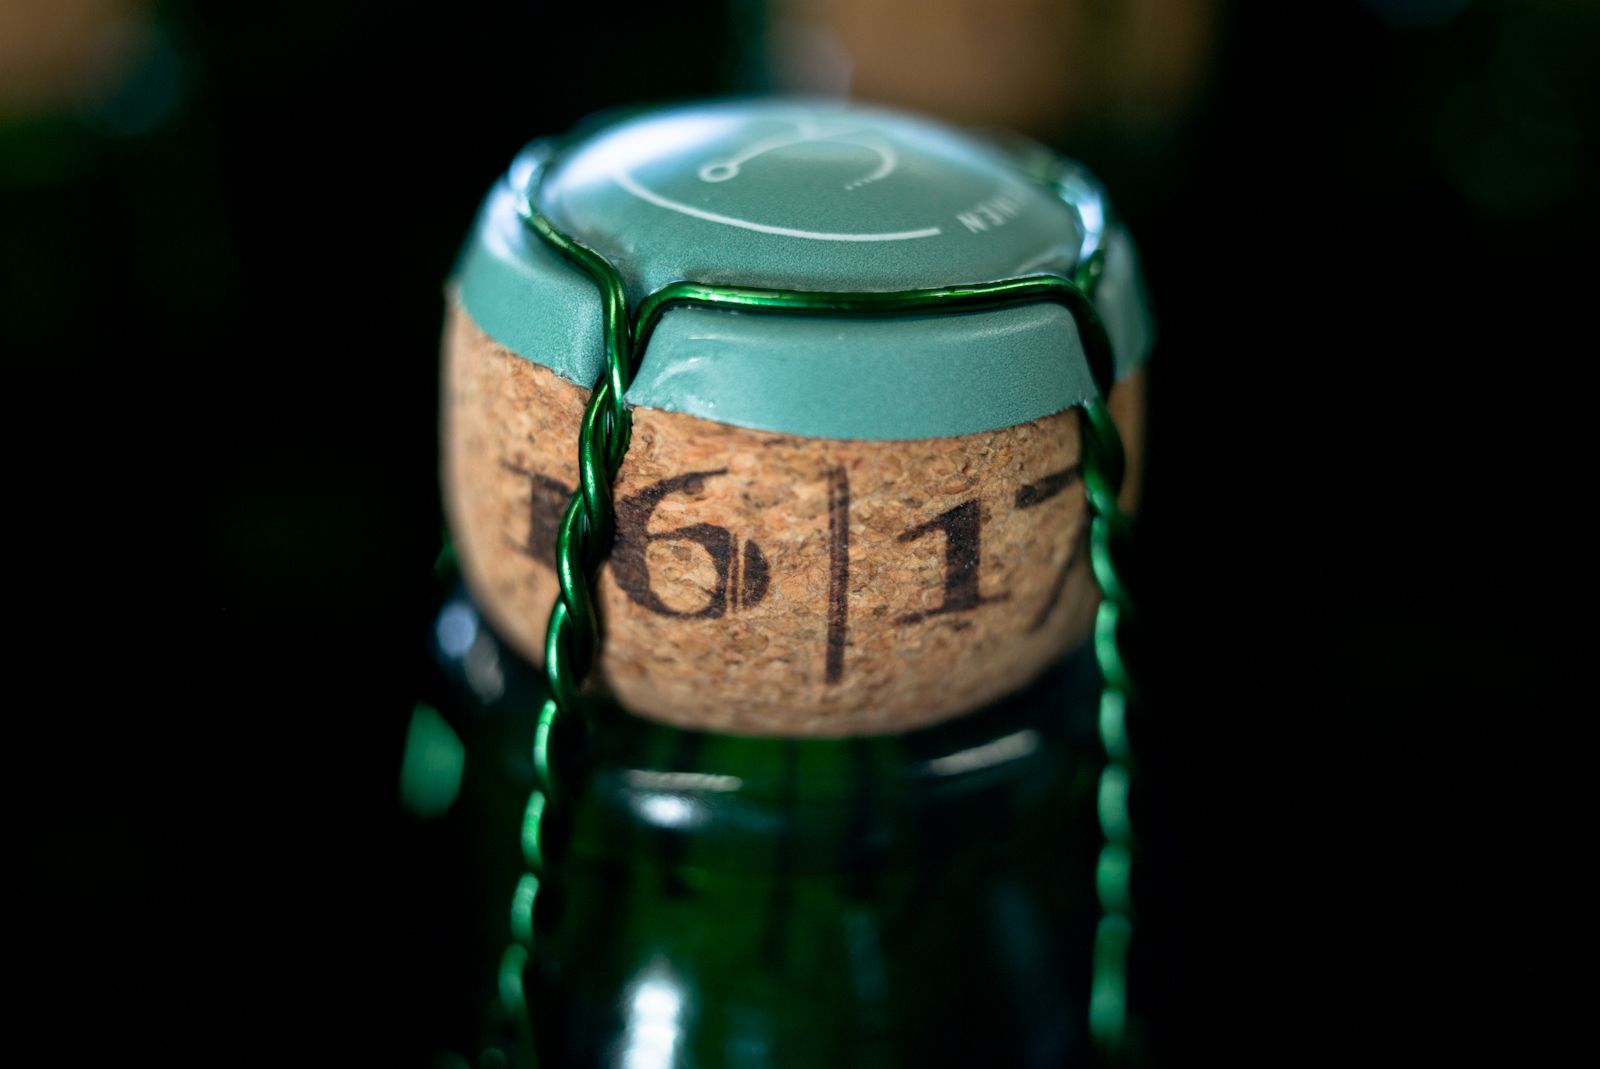 The cork indicates in which season the bottle was bottled.